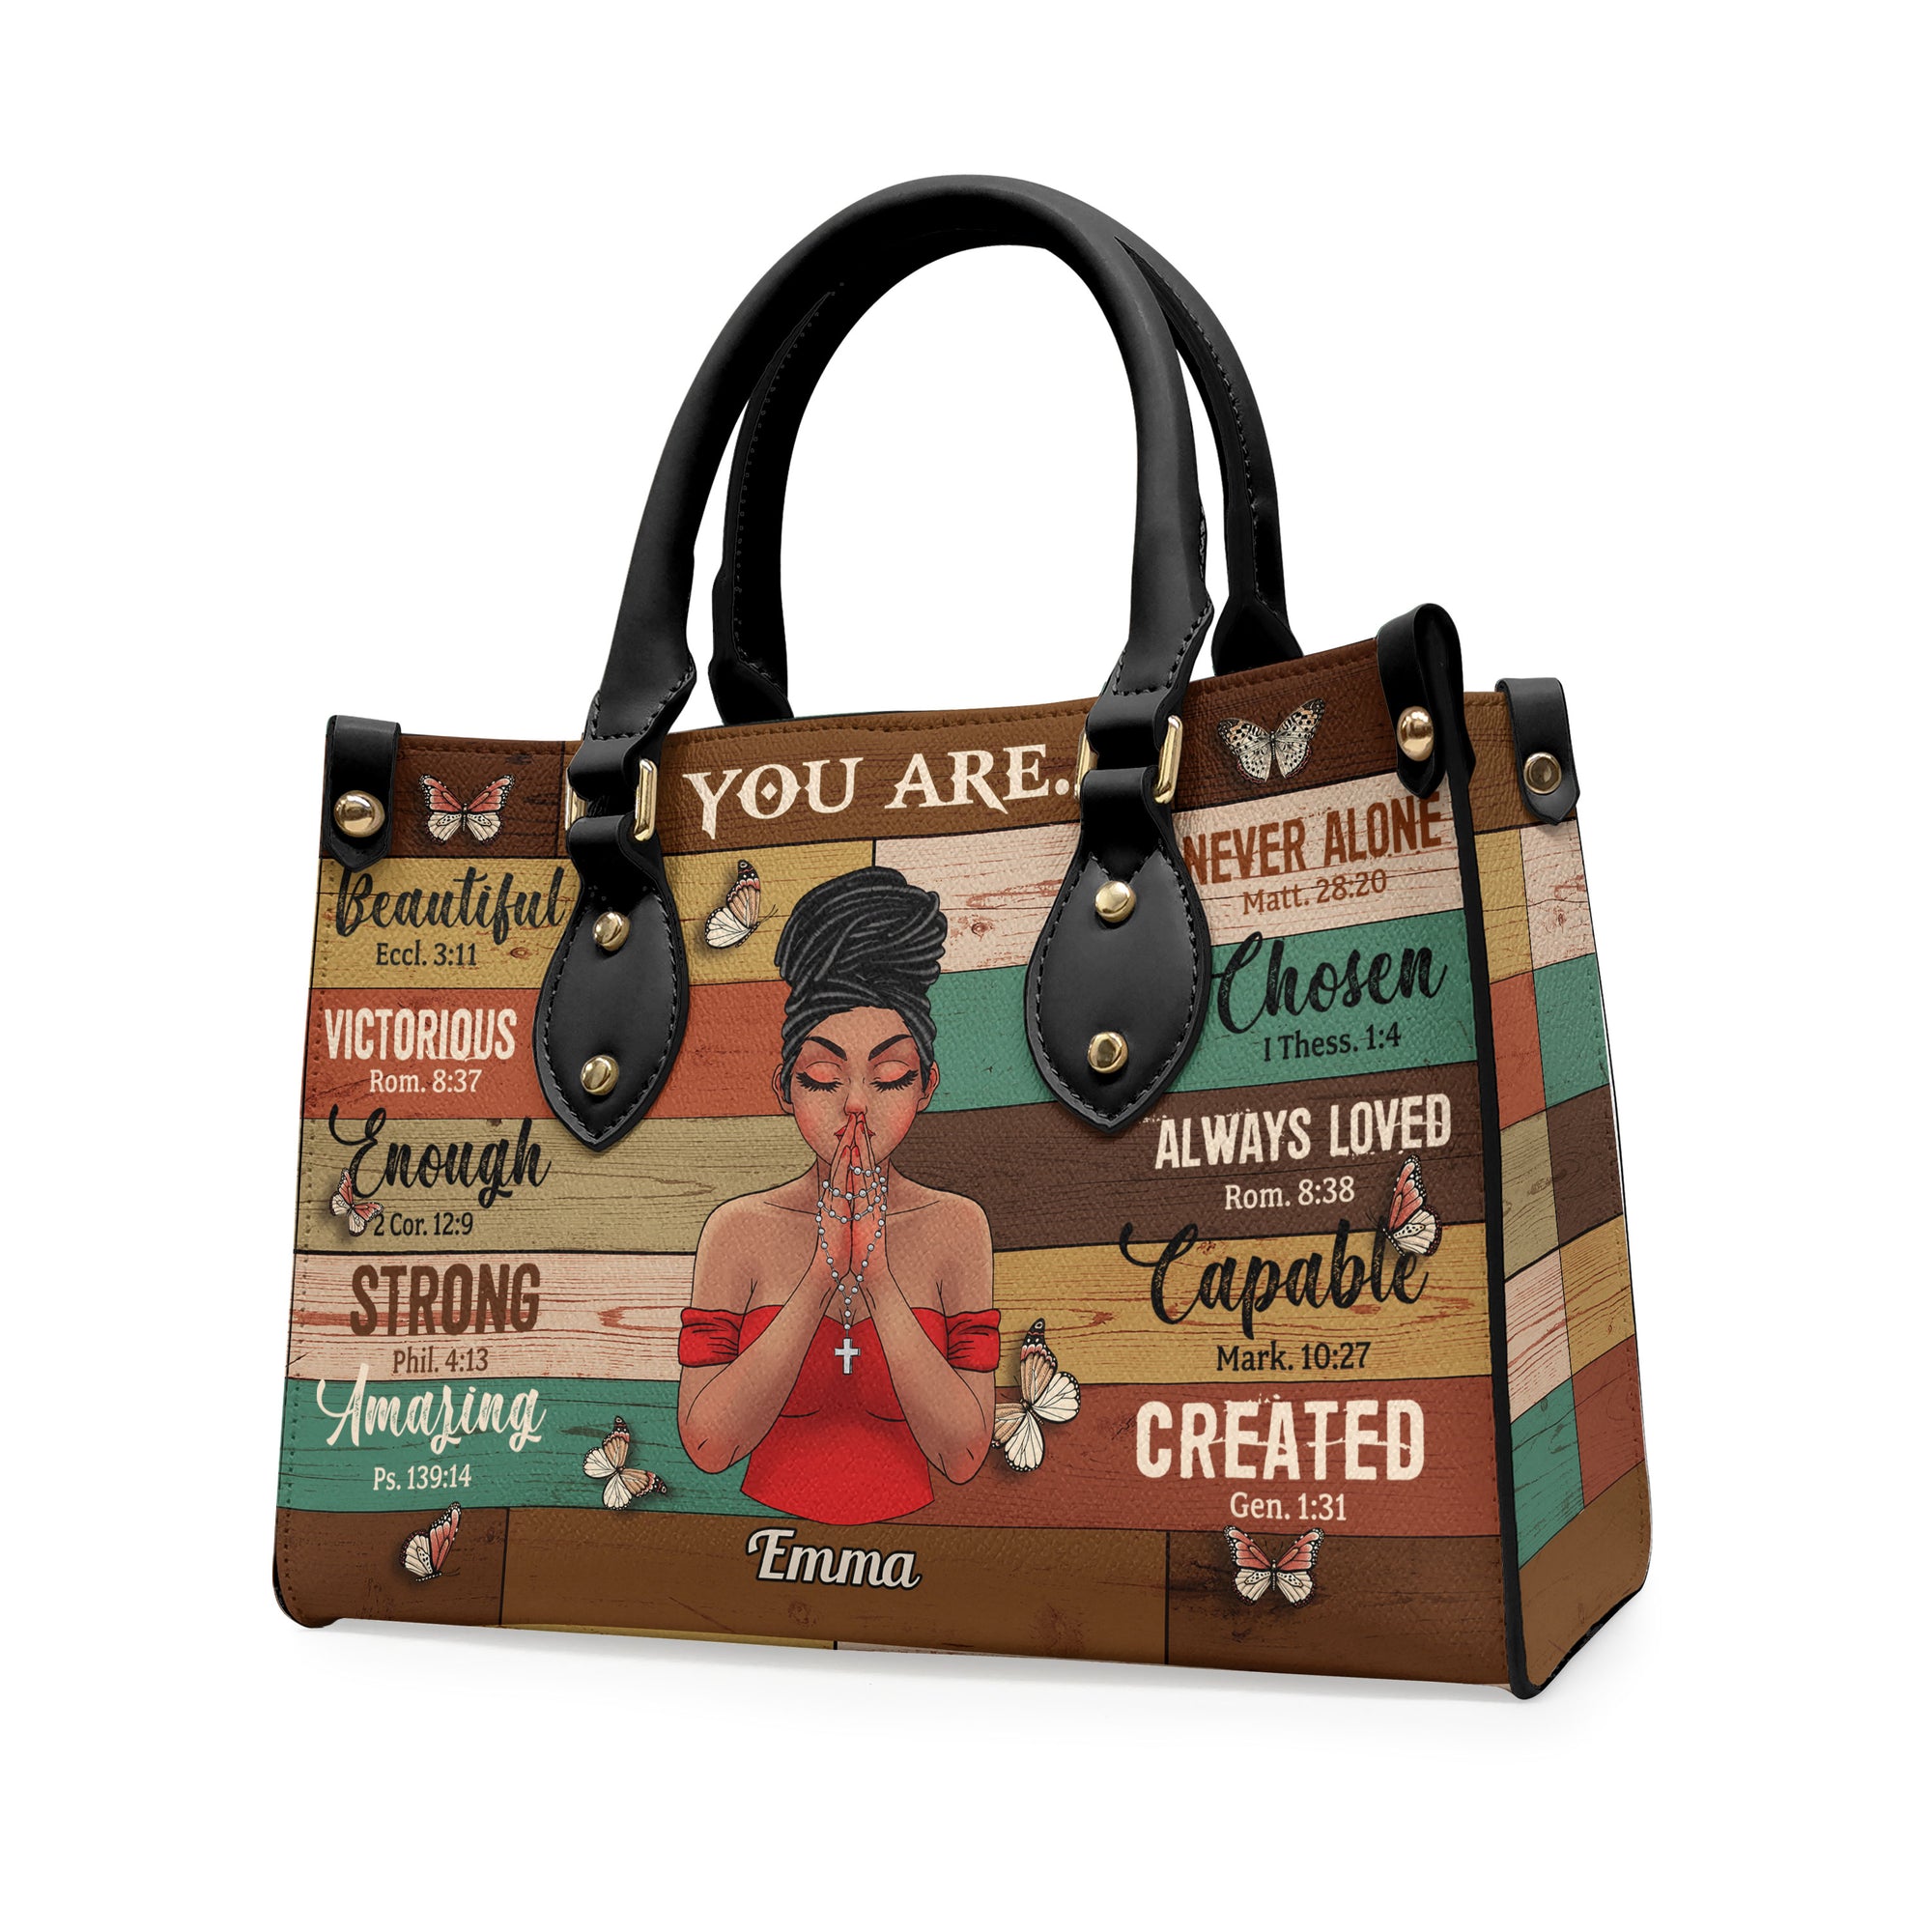 You Are Beautiful Strong - Personalized Leather Bag